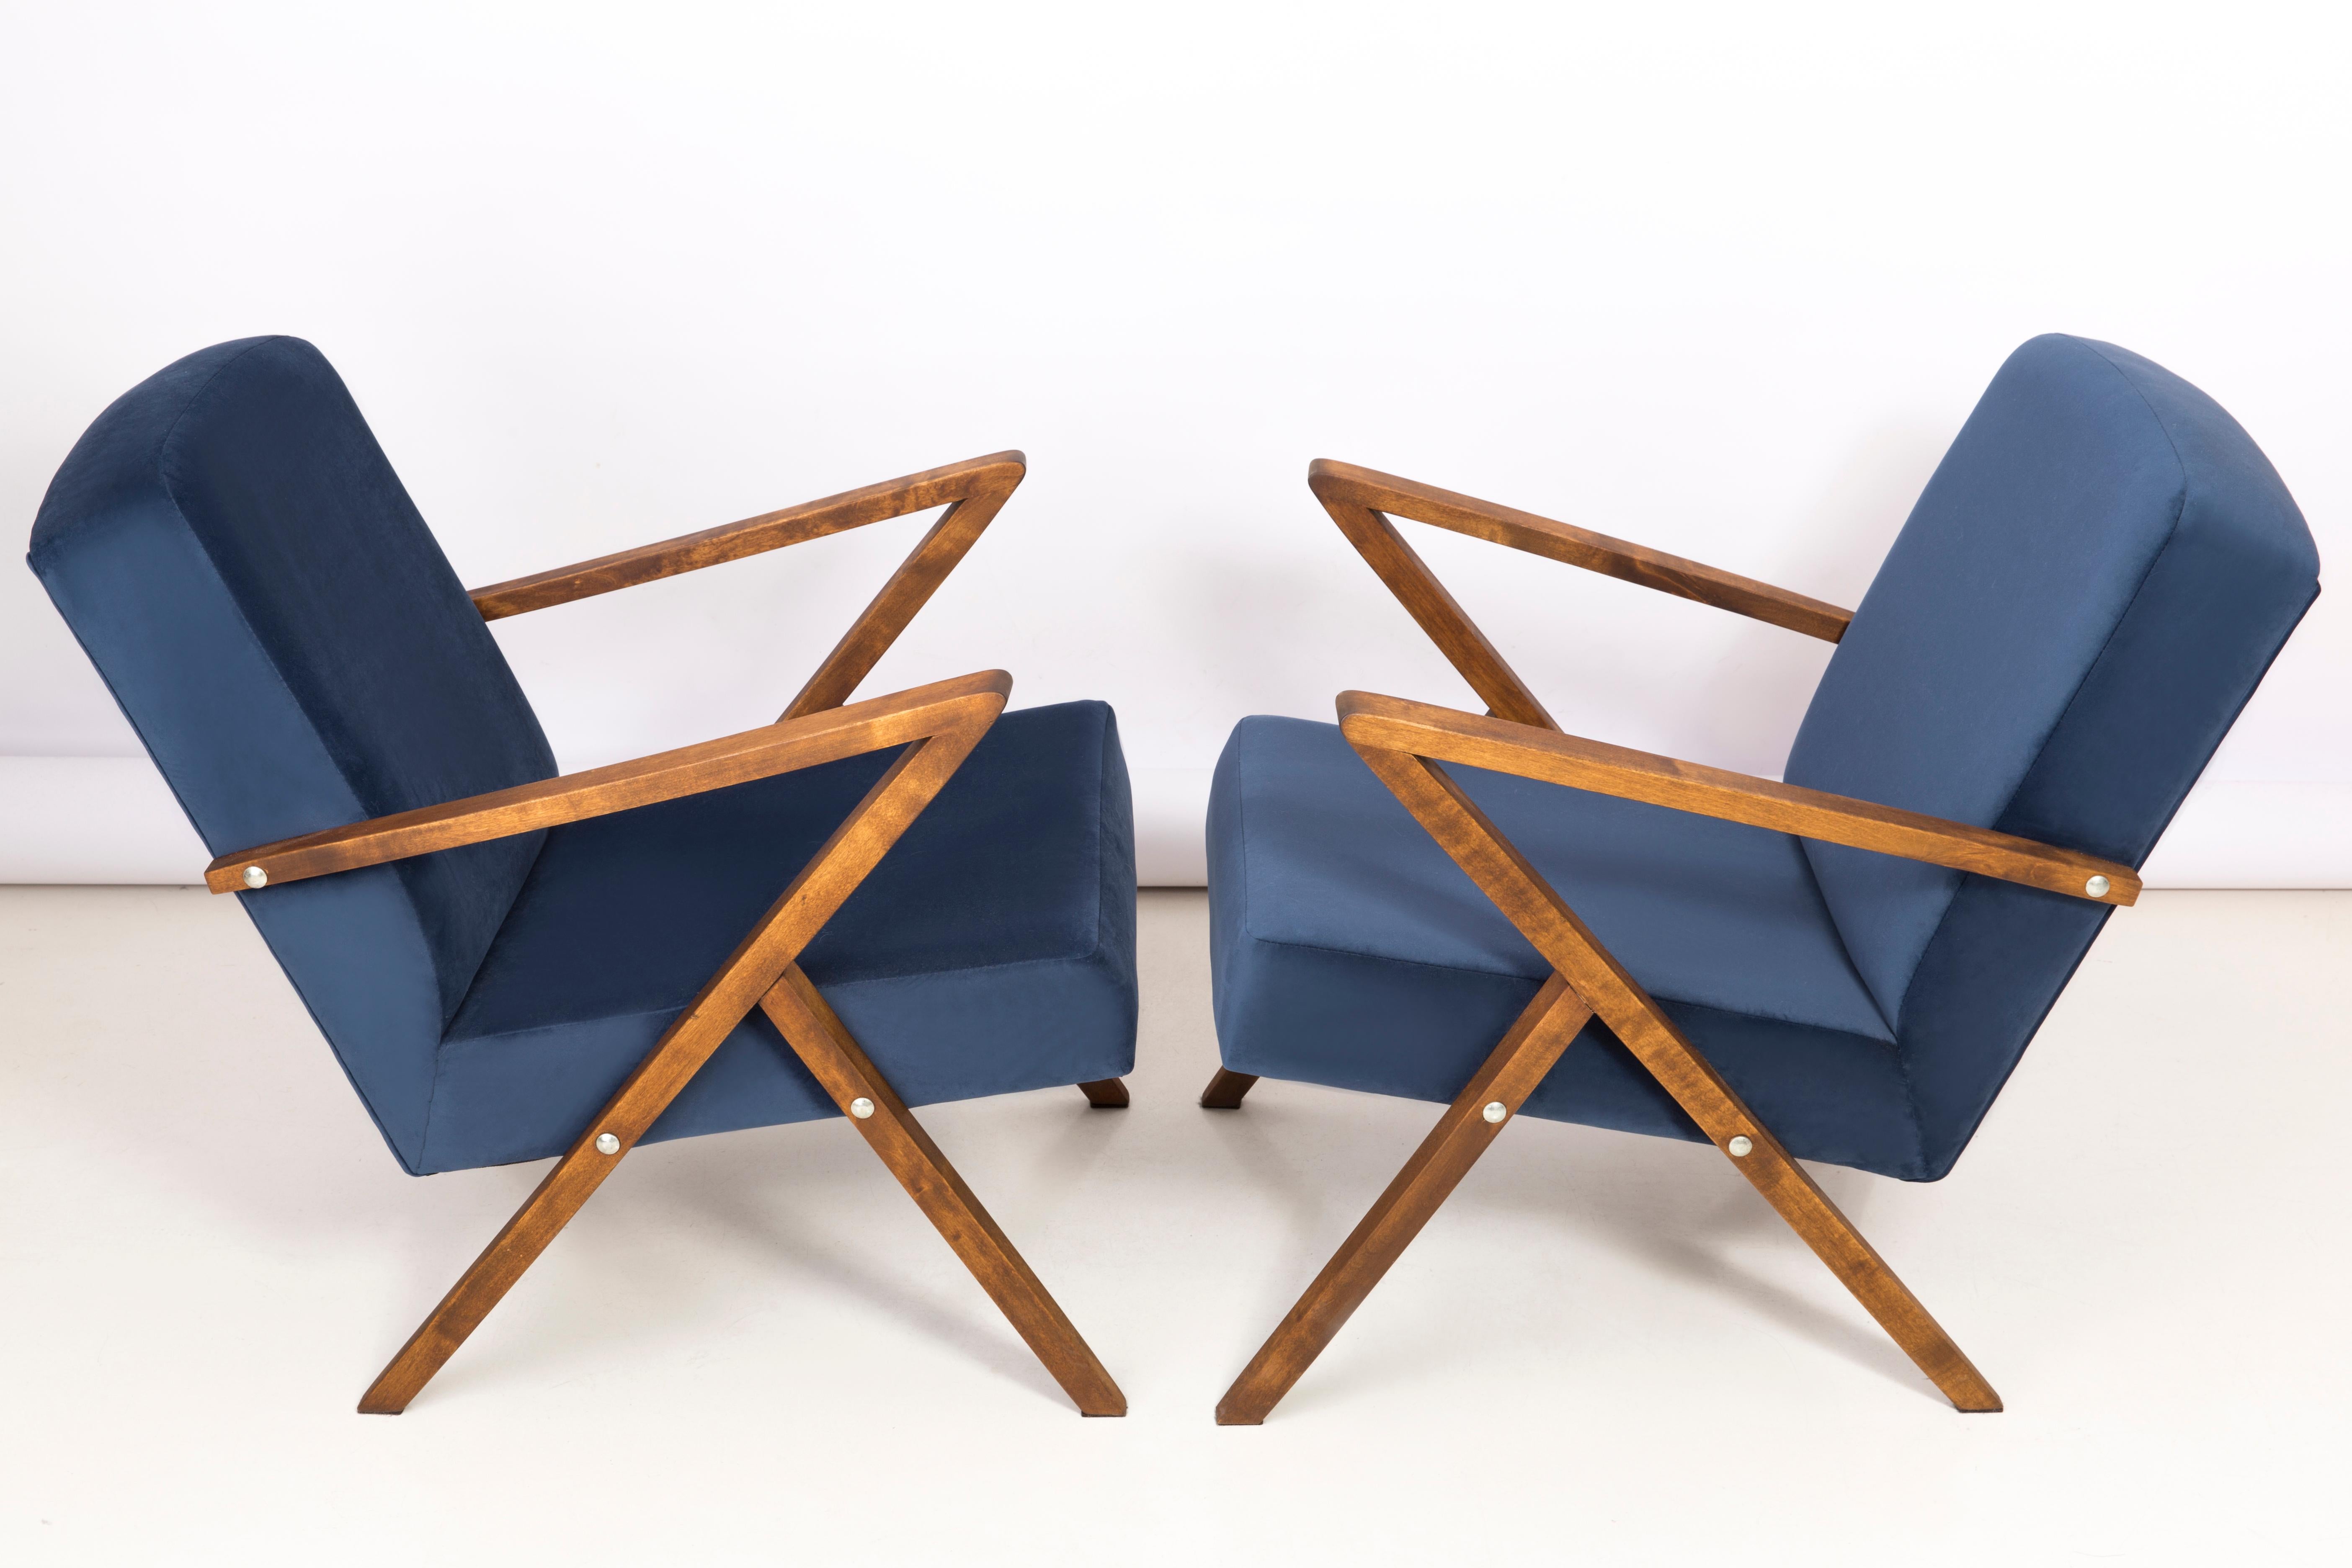 A pair of armchairs manufactured at the Bydgoszcz Renewal Cooperative in the 1970s. The armchairs are after a comprehensive renovation of carpentry and upholstery. The wood has been cleaned, cavities completed, painted with dark walnut stain,